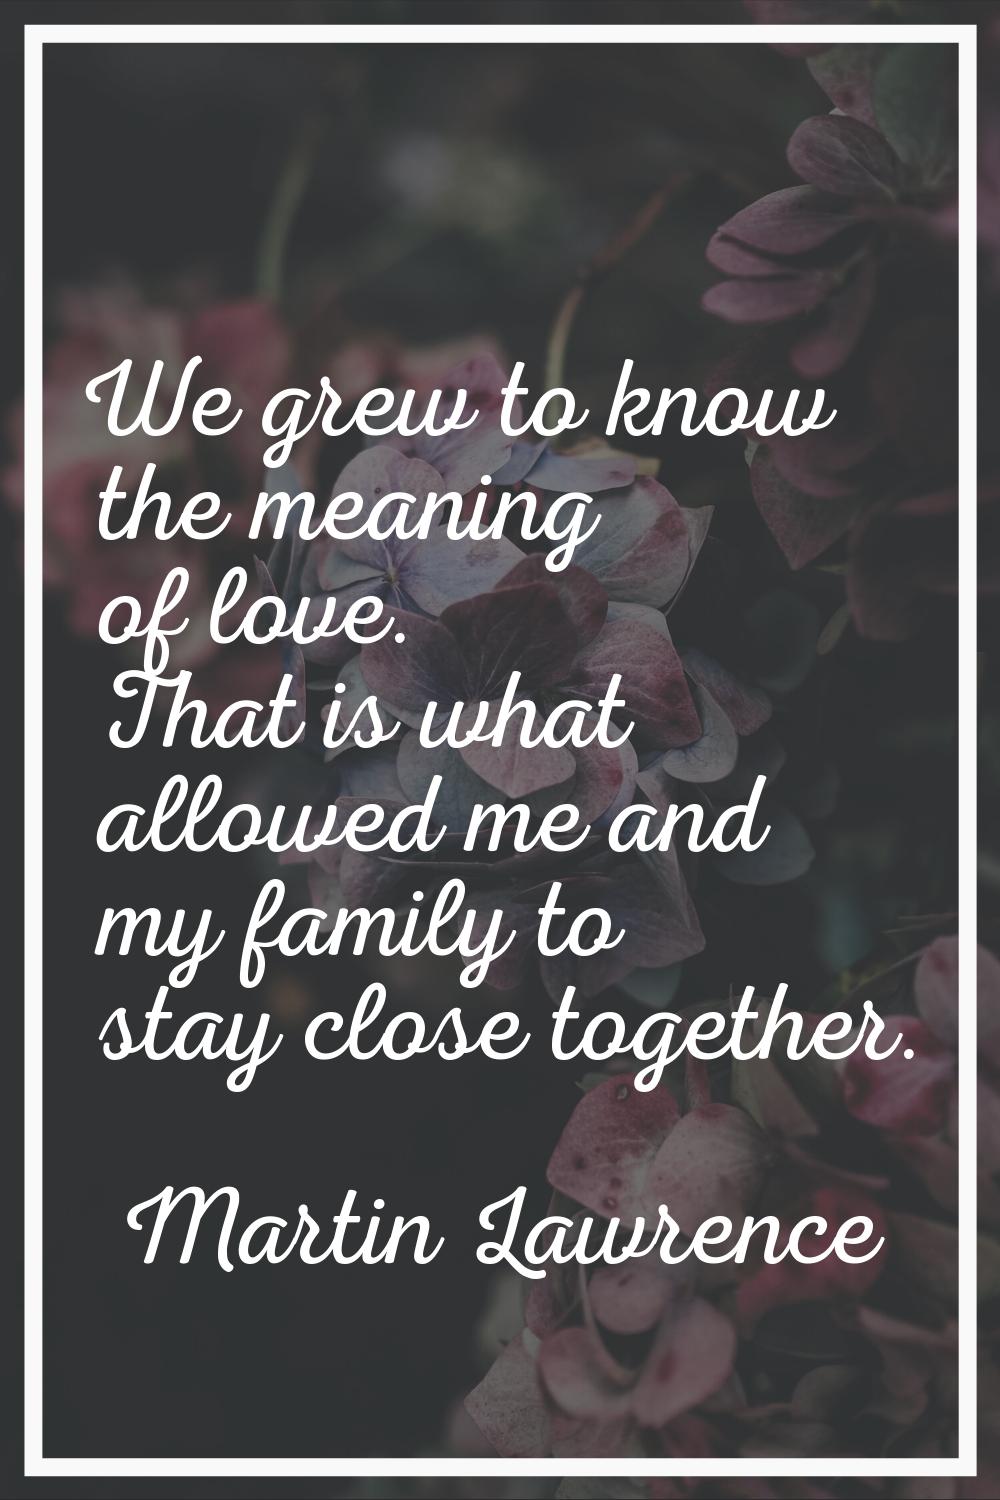 We grew to know the meaning of love. That is what allowed me and my family to stay close together.